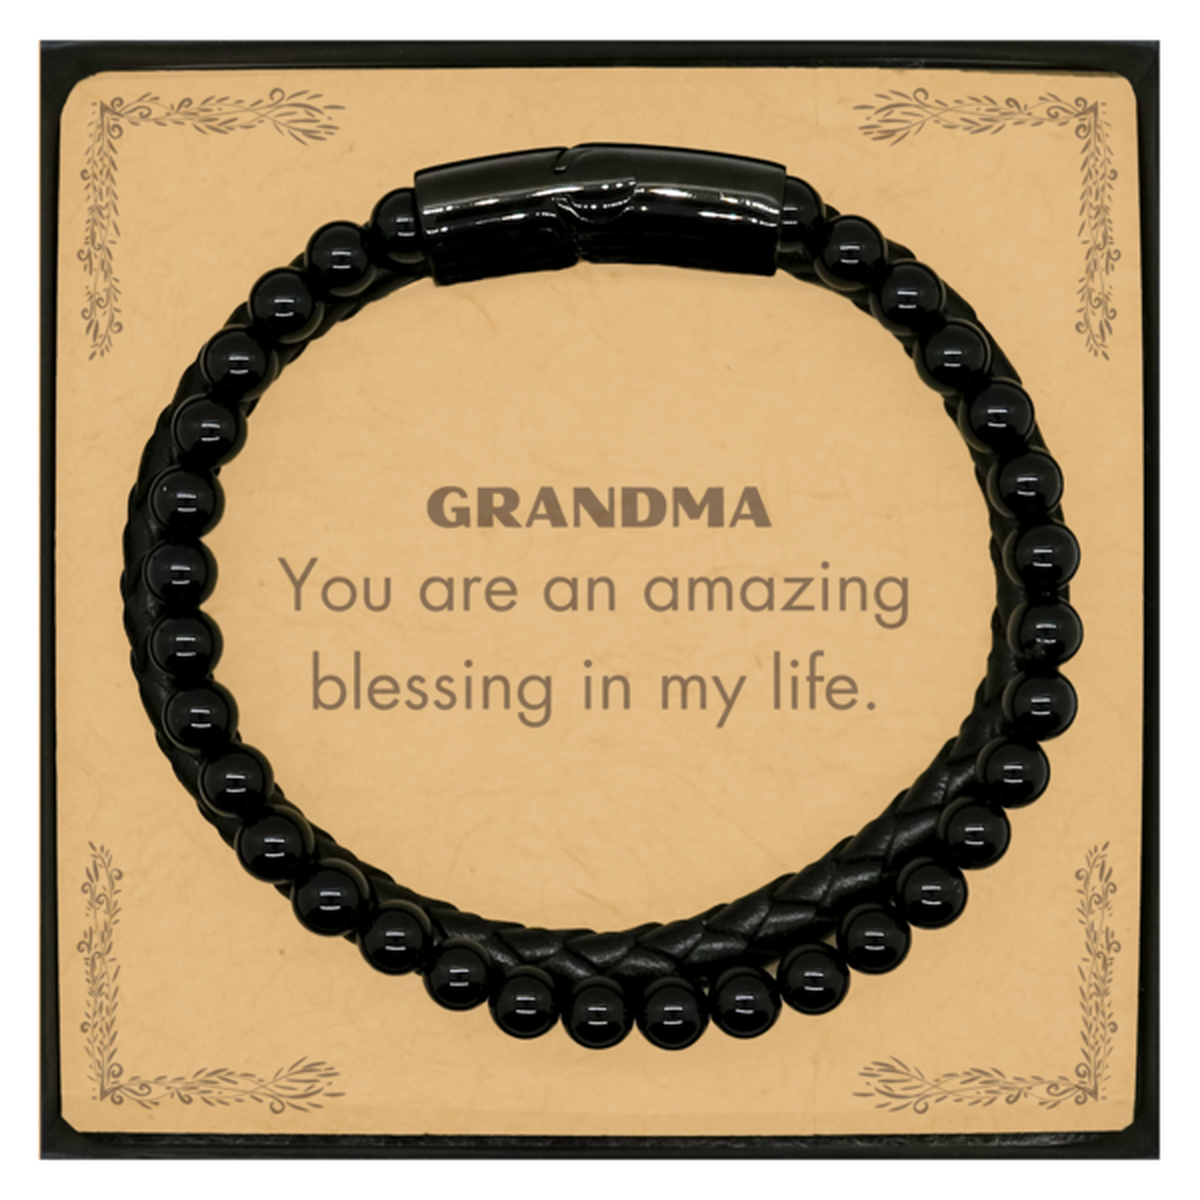 Grandma Stone Leather Bracelets, You are an amazing blessing in my life, Thank You Gifts For Grandma, Inspirational Birthday Christmas Unique Gifts For Grandma